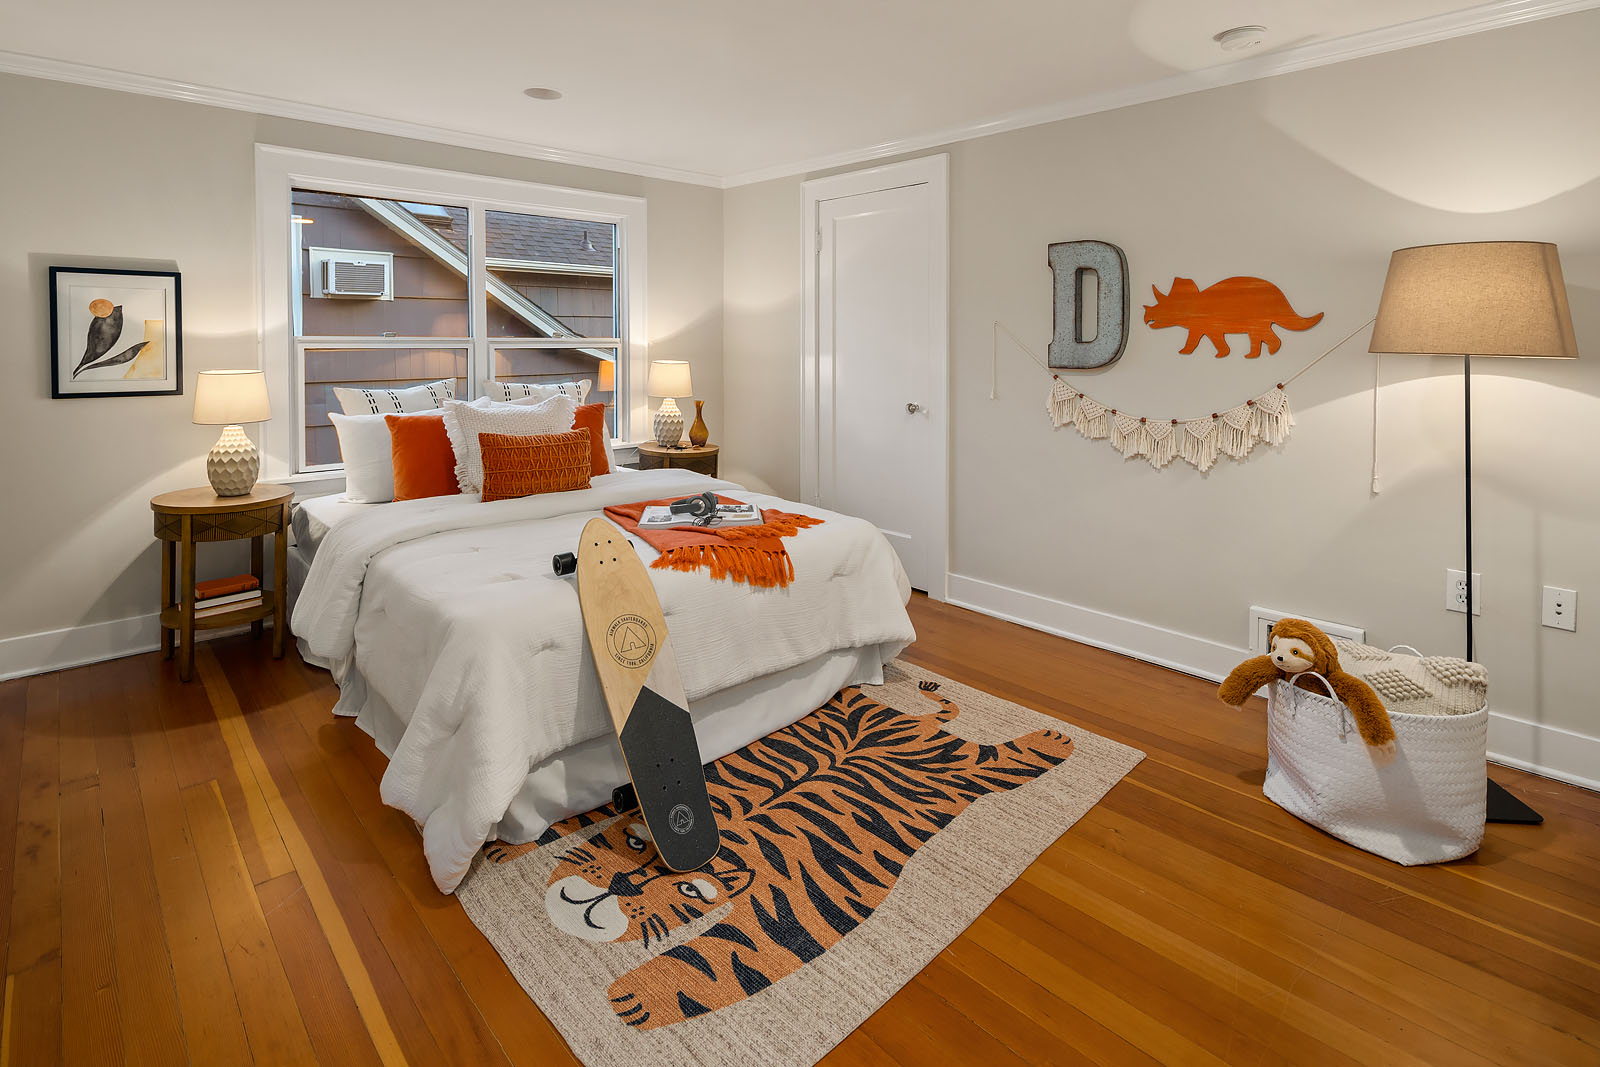 staged kid's bedroom with fun and playful accessories such as a tiger area rug